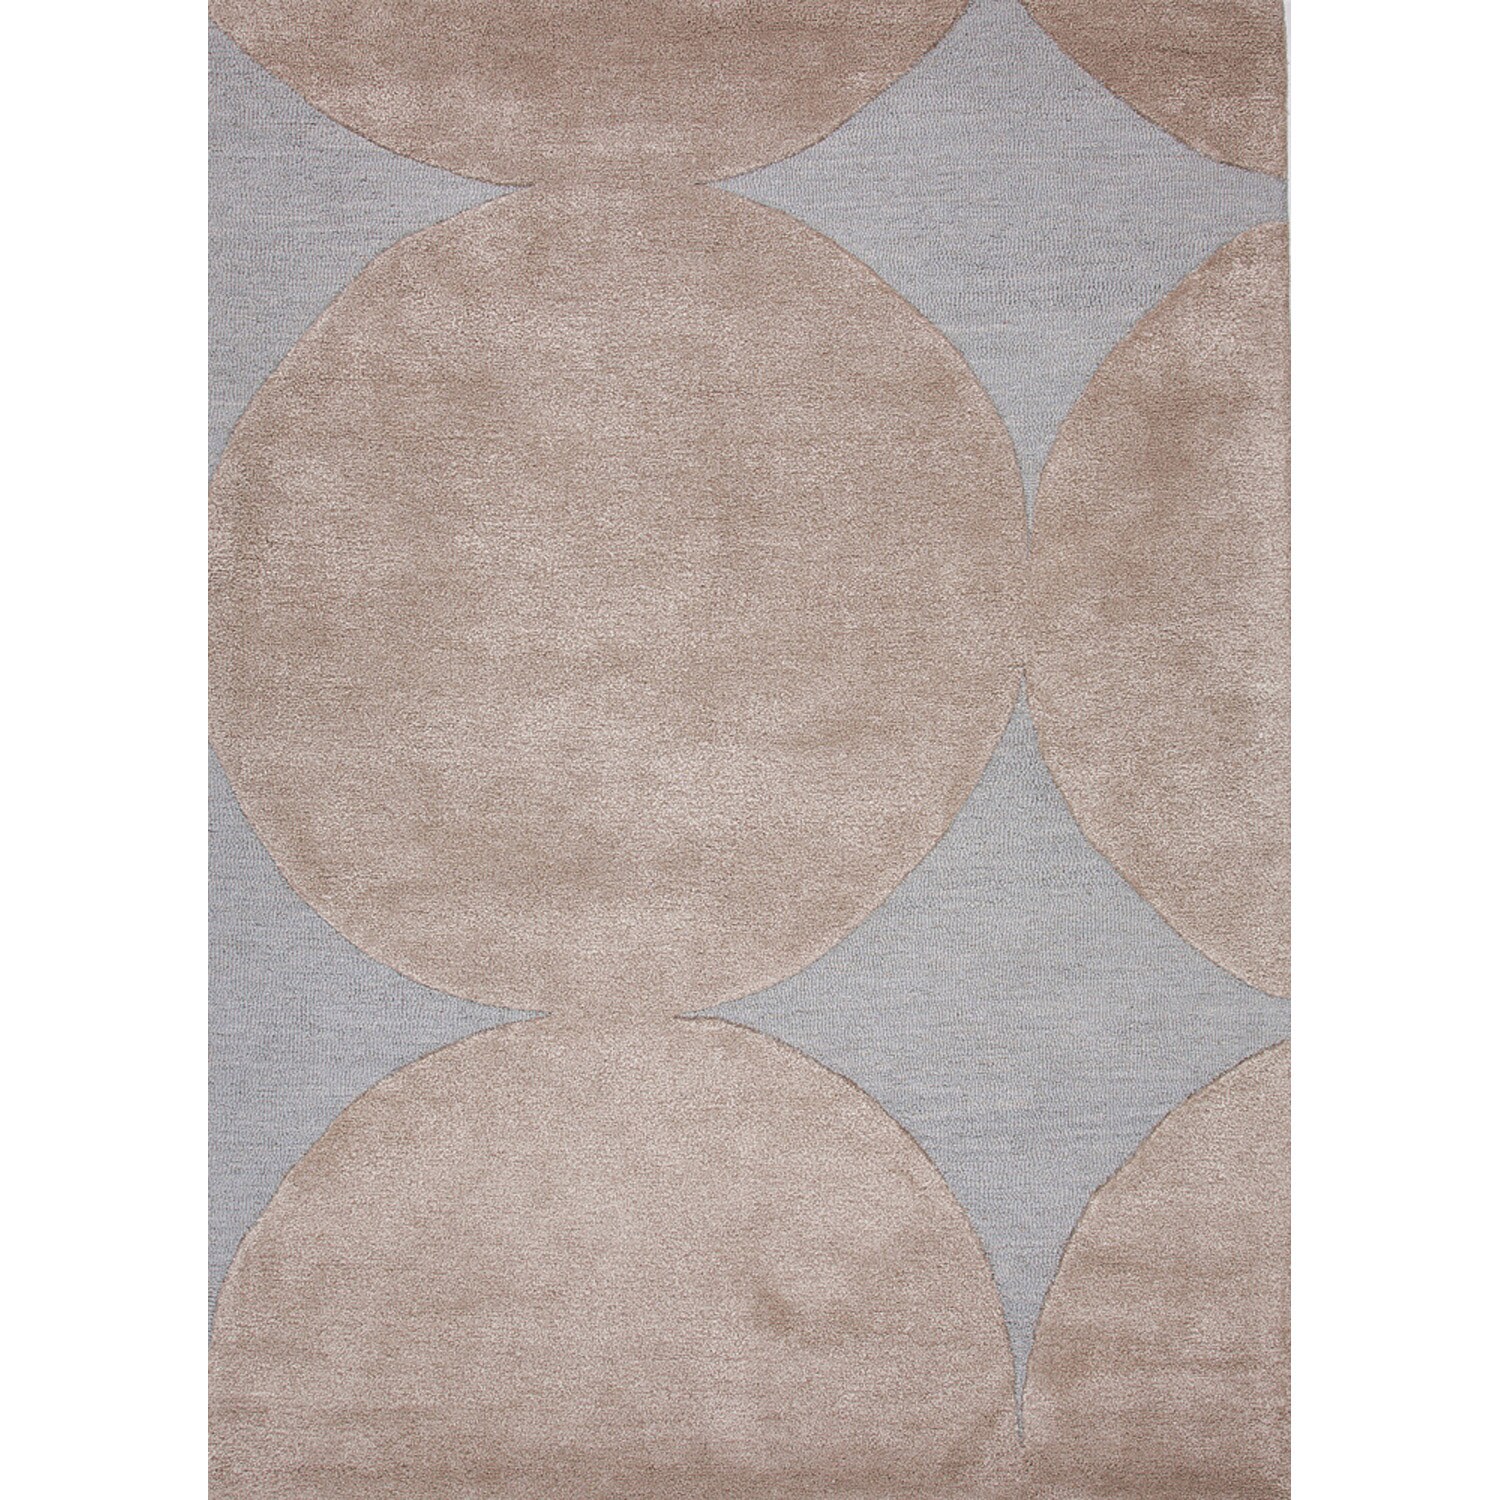 Hand tufted Contemporary Geometric Pattern Blue Rug (36 X 56)